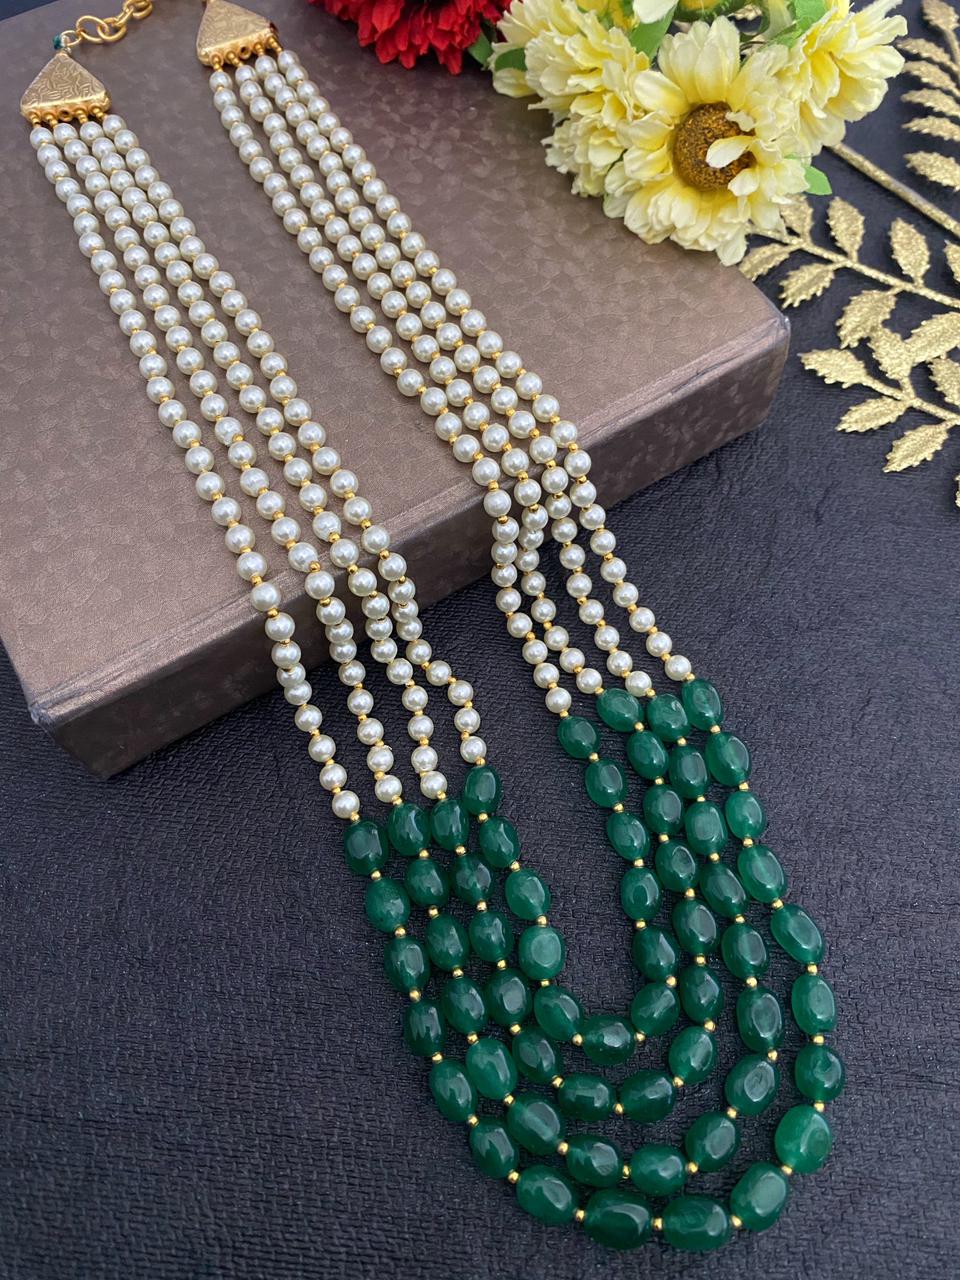 Designer Multi Layered Beaded Pearls Necklace Mala For Grooms By Gehna Shop Beads Jewellery